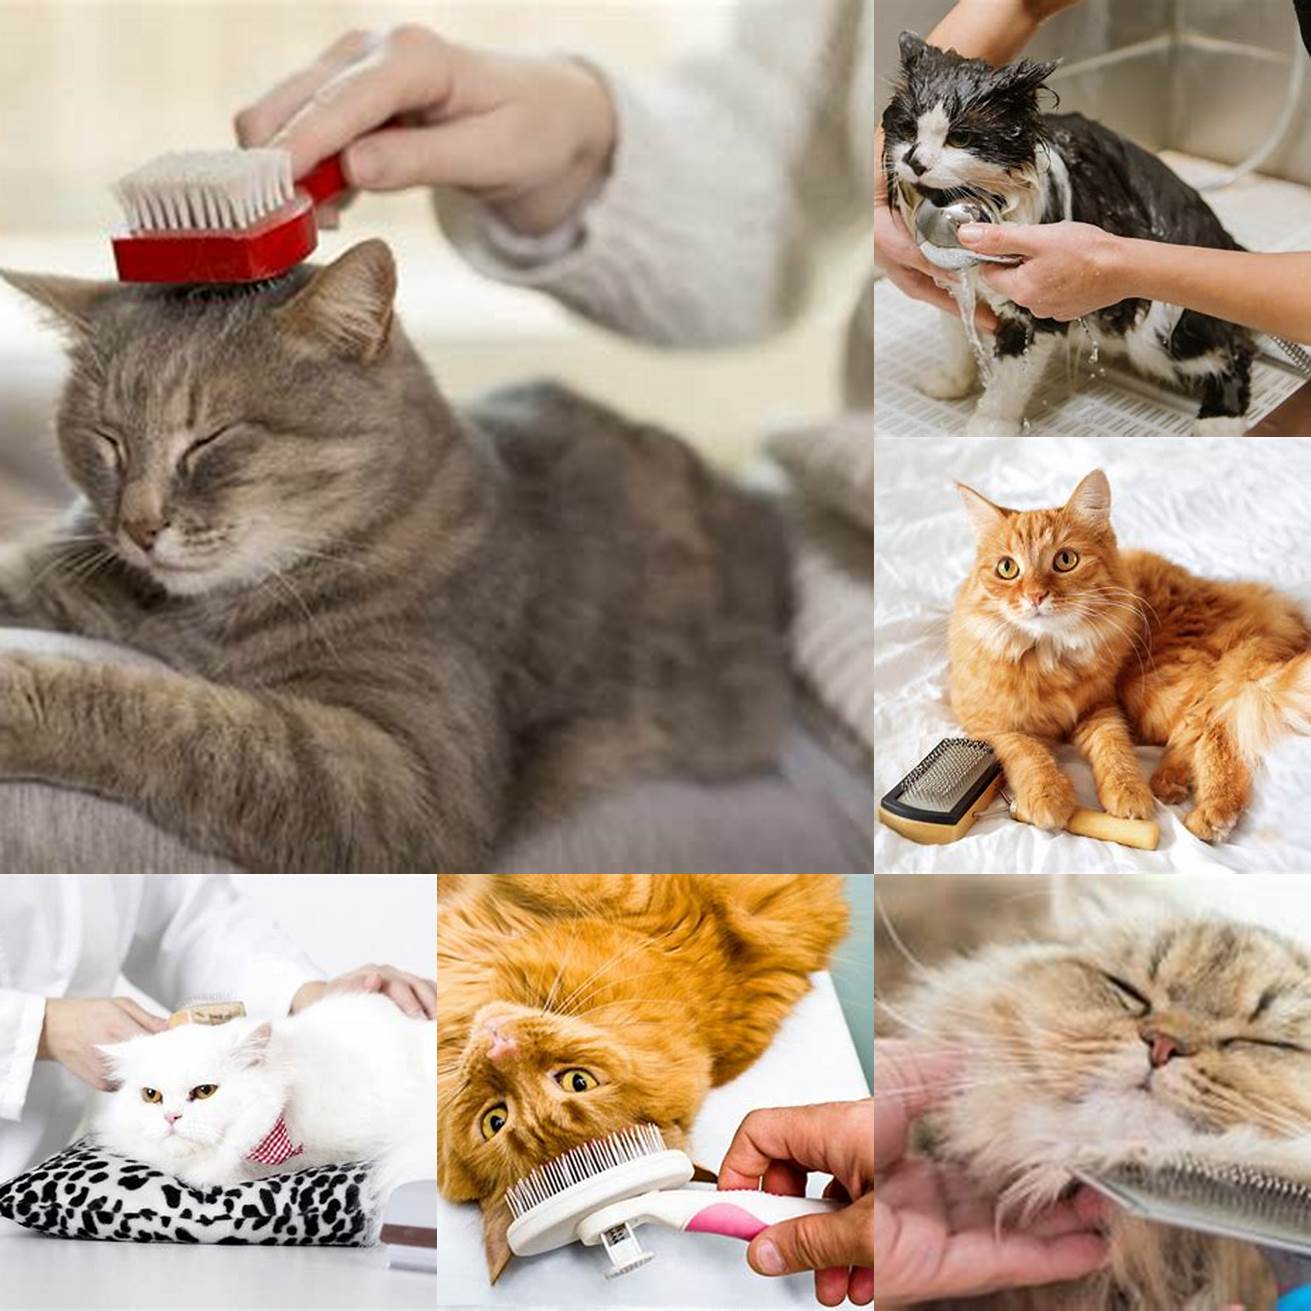 Keep your cat clean and well-groomed Regular grooming can help to prevent the spread of mange and other skin conditions